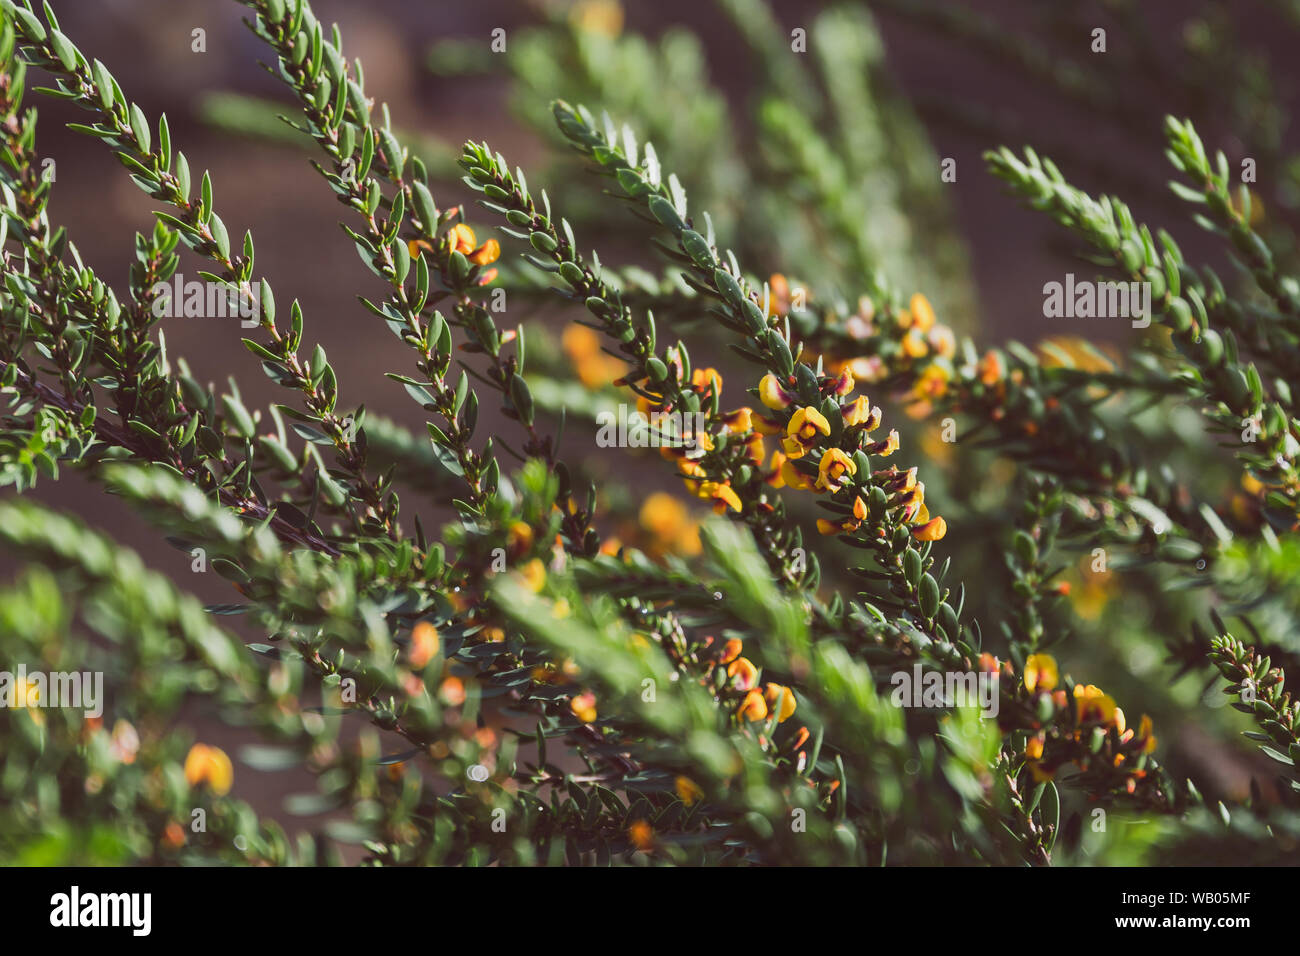 eutaxia obovata (also called egg and bacon plant) with green spiky leaves and yellow flowers, shot at shallow depth of field Stock Photo